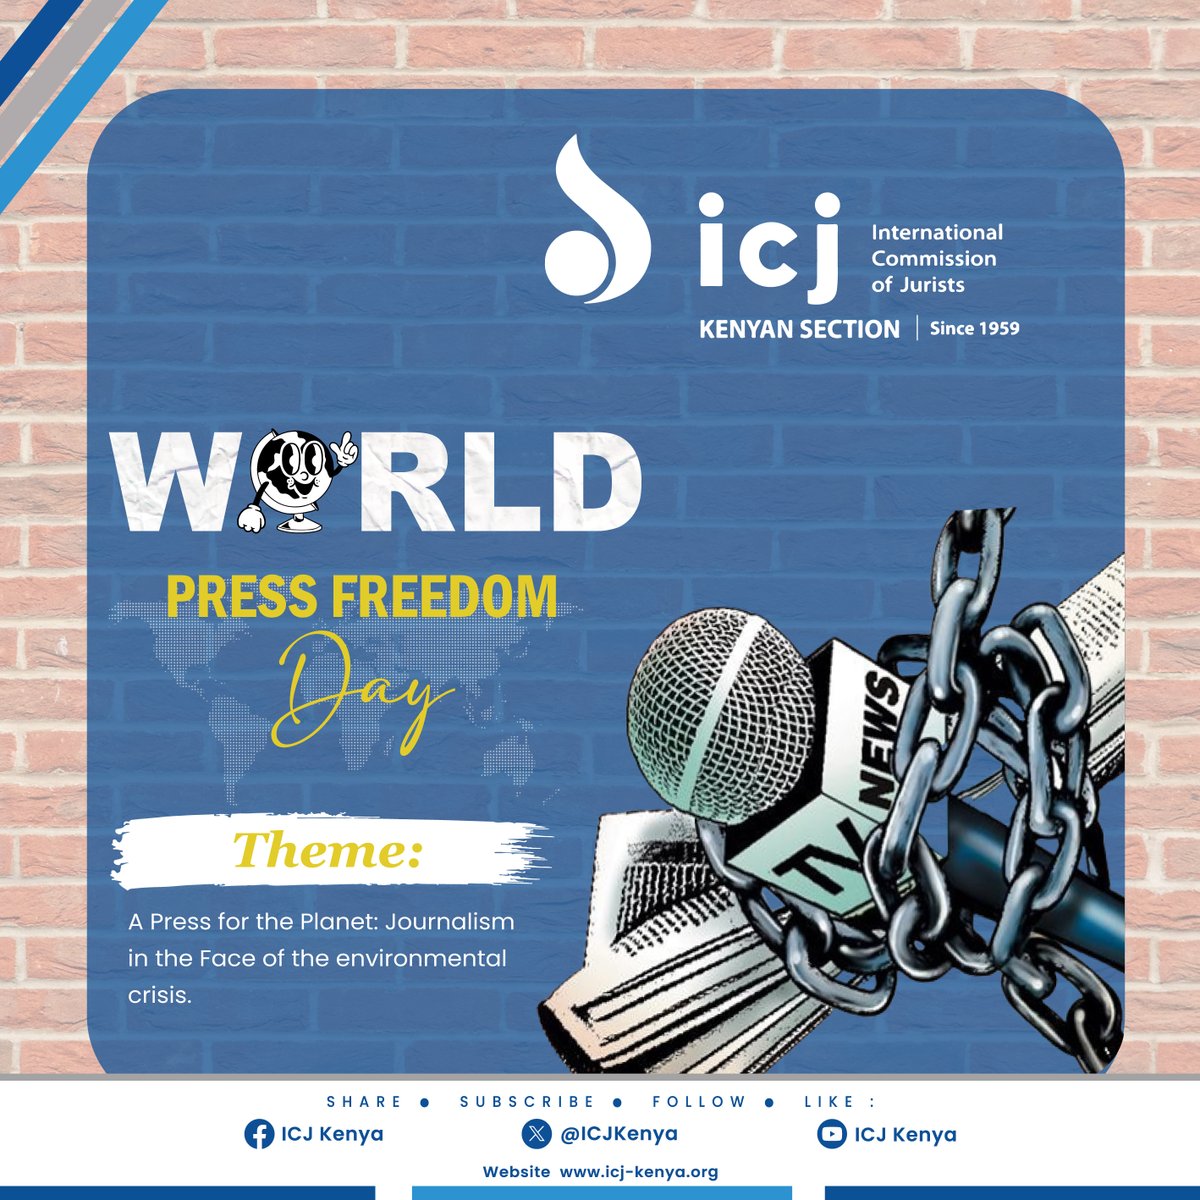 As we commemorate #WorldPressFreedom day, today we celebrate the value of truth and honour the people who work courageously to uncover it. #ICJKenya